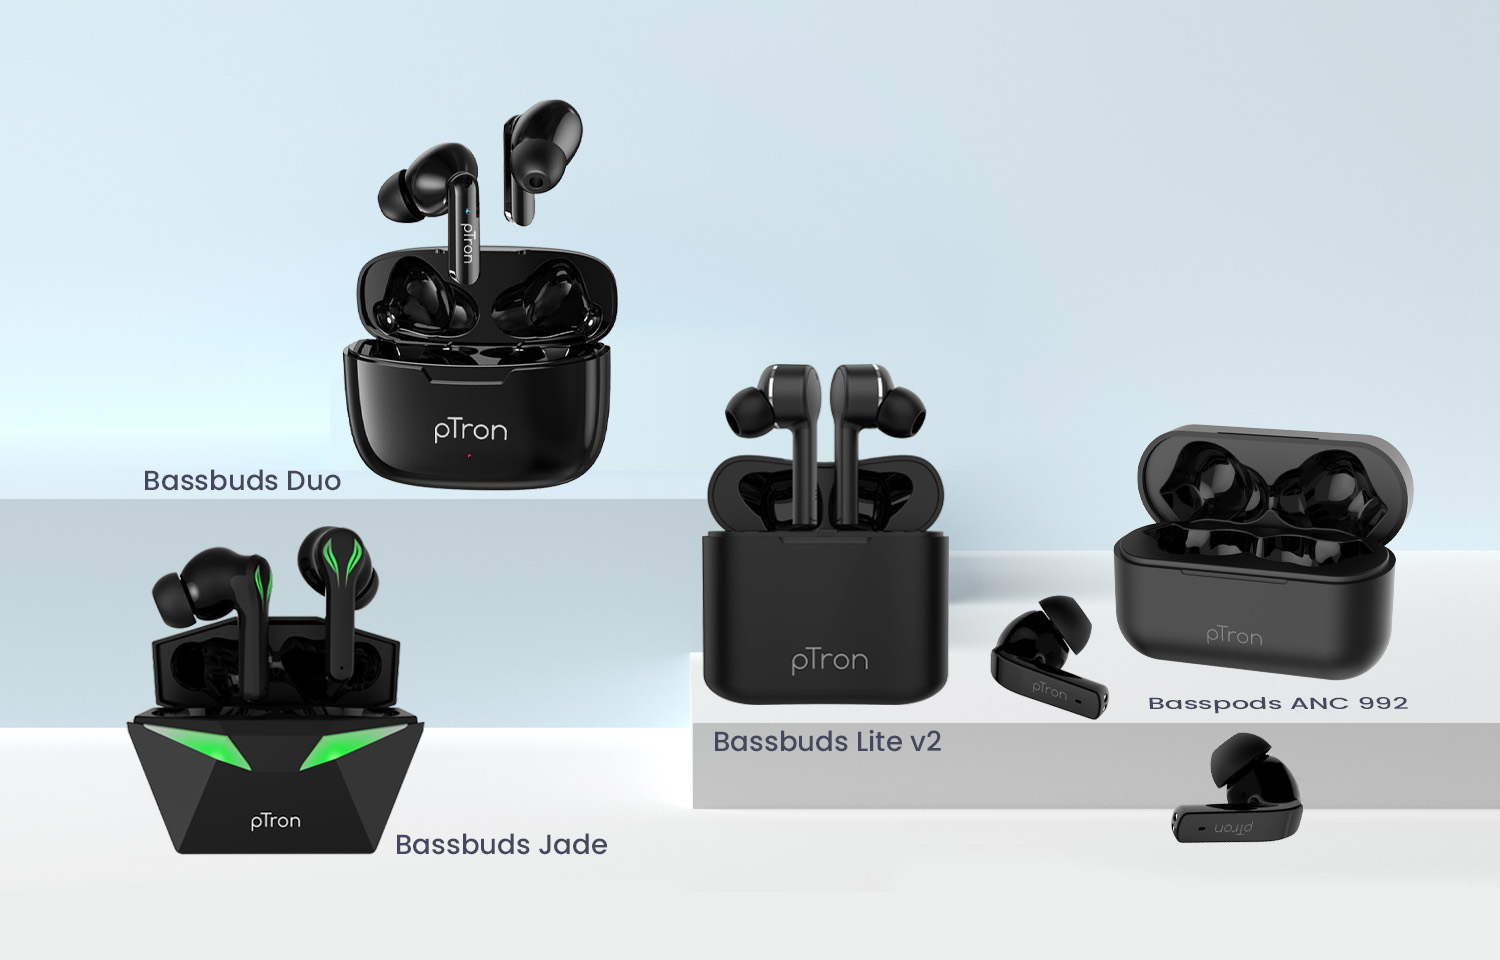 ptron-launches-gaming-earbuds-and-3-new-tws-earbuds-ahead-of-the-festive-season-prices-starts-at-999